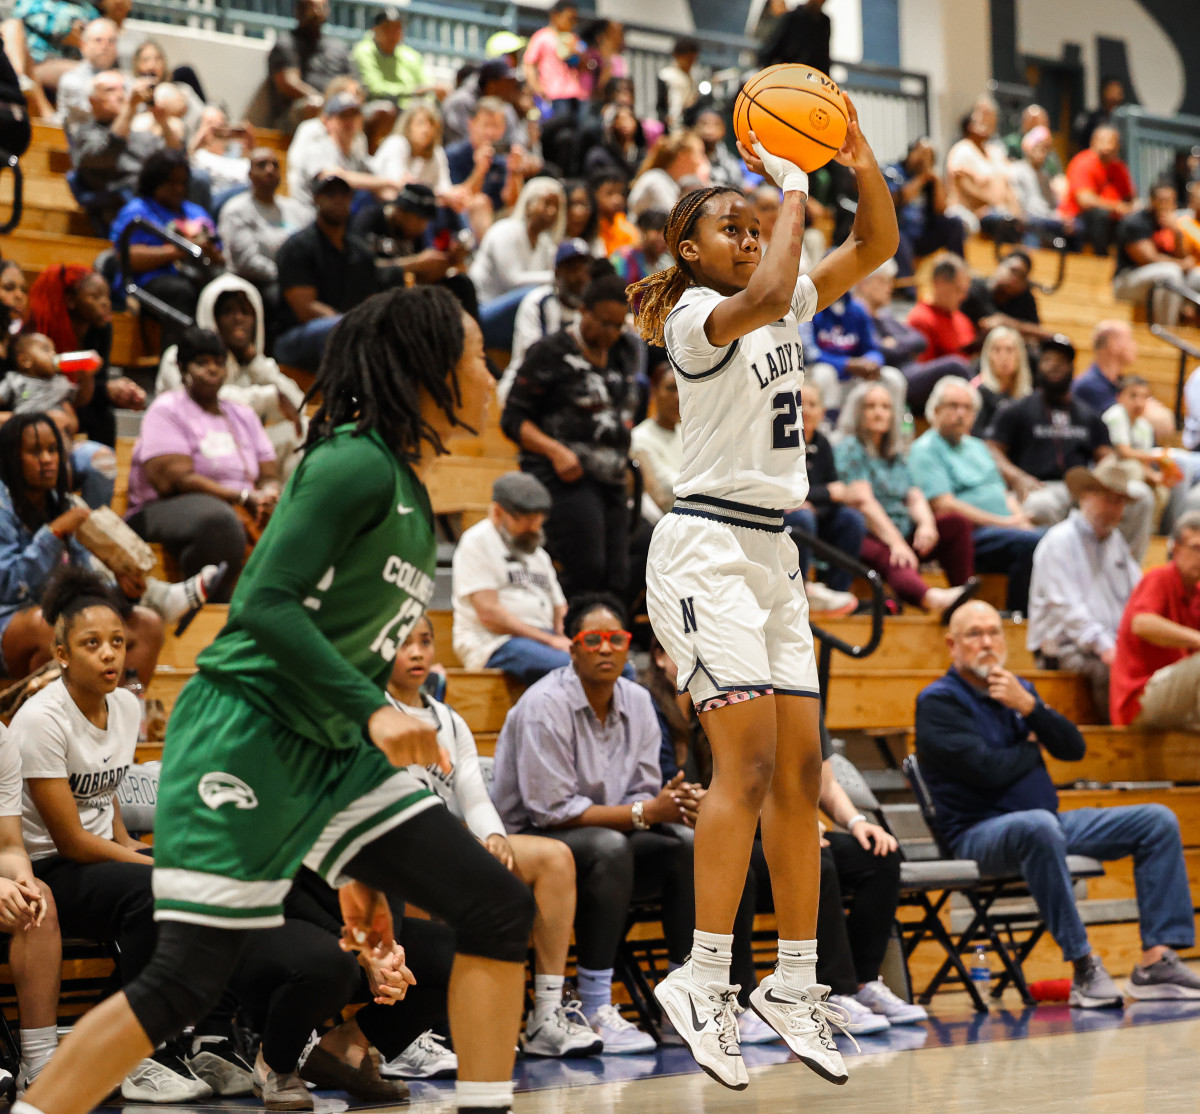 Norcross' Jania Jenkins, who led the Blue Devils with 25 points, releases a shot from the wing.